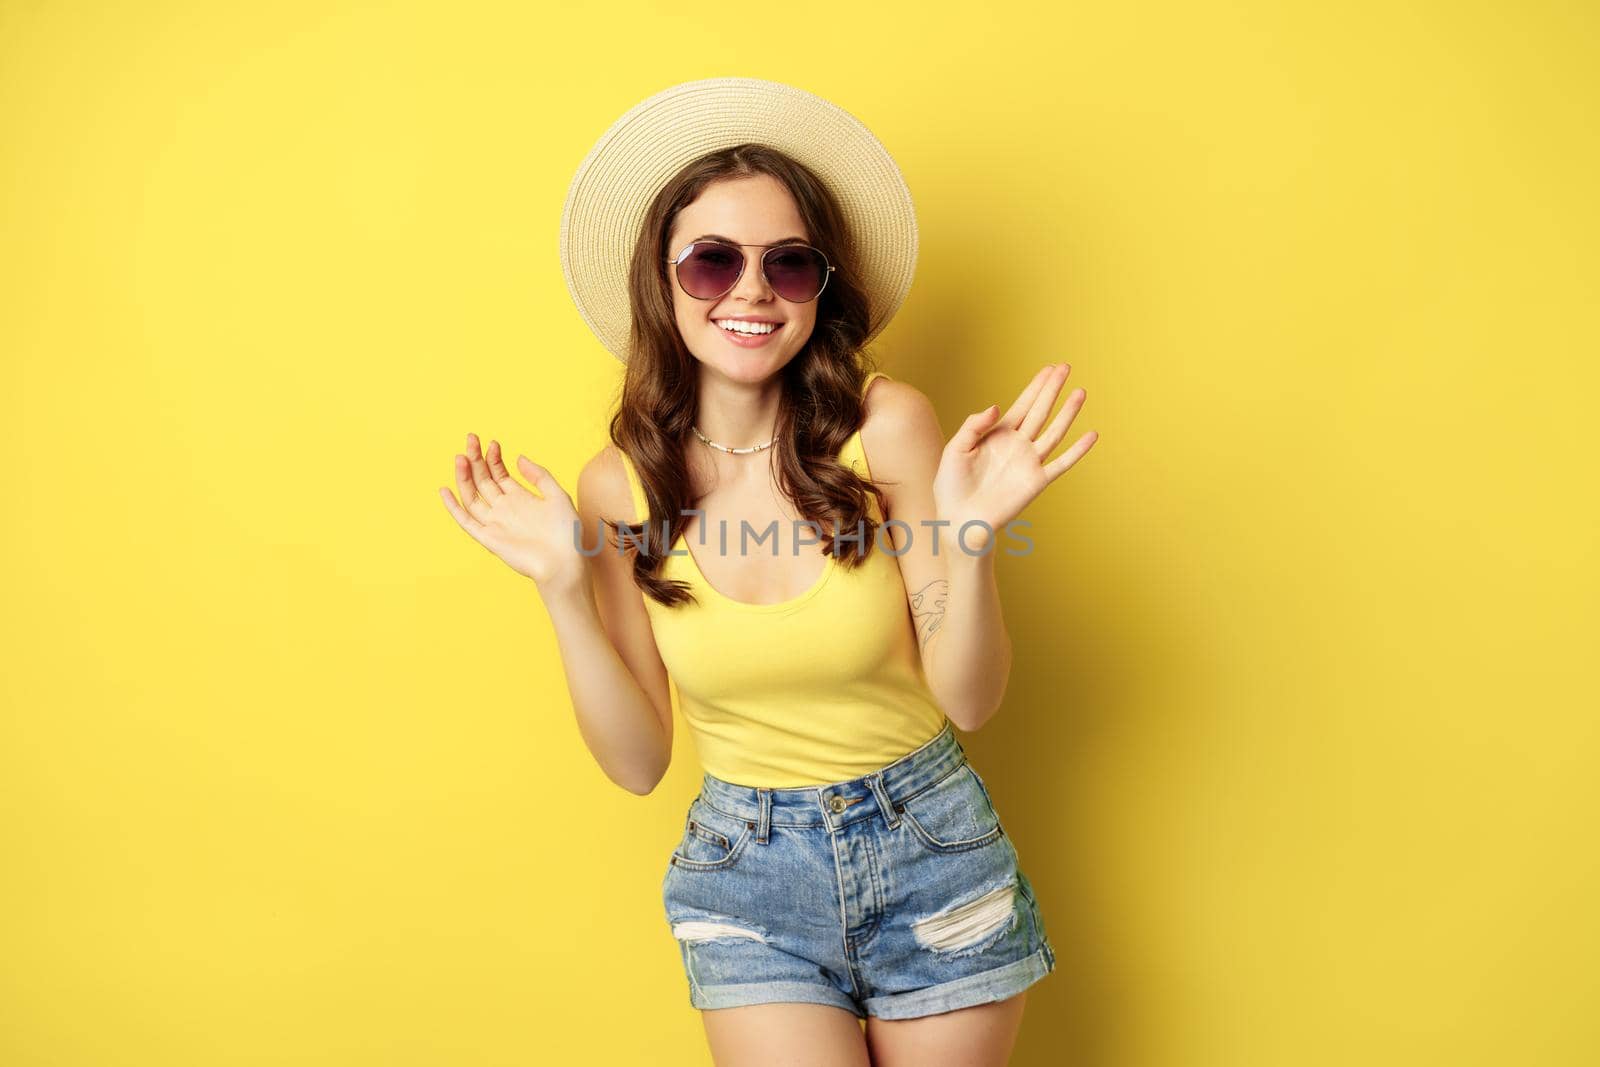 Happy sexy young woman on vacation, wearing straw hat, sunglasses, laughing and smiling, standing over yellow background.